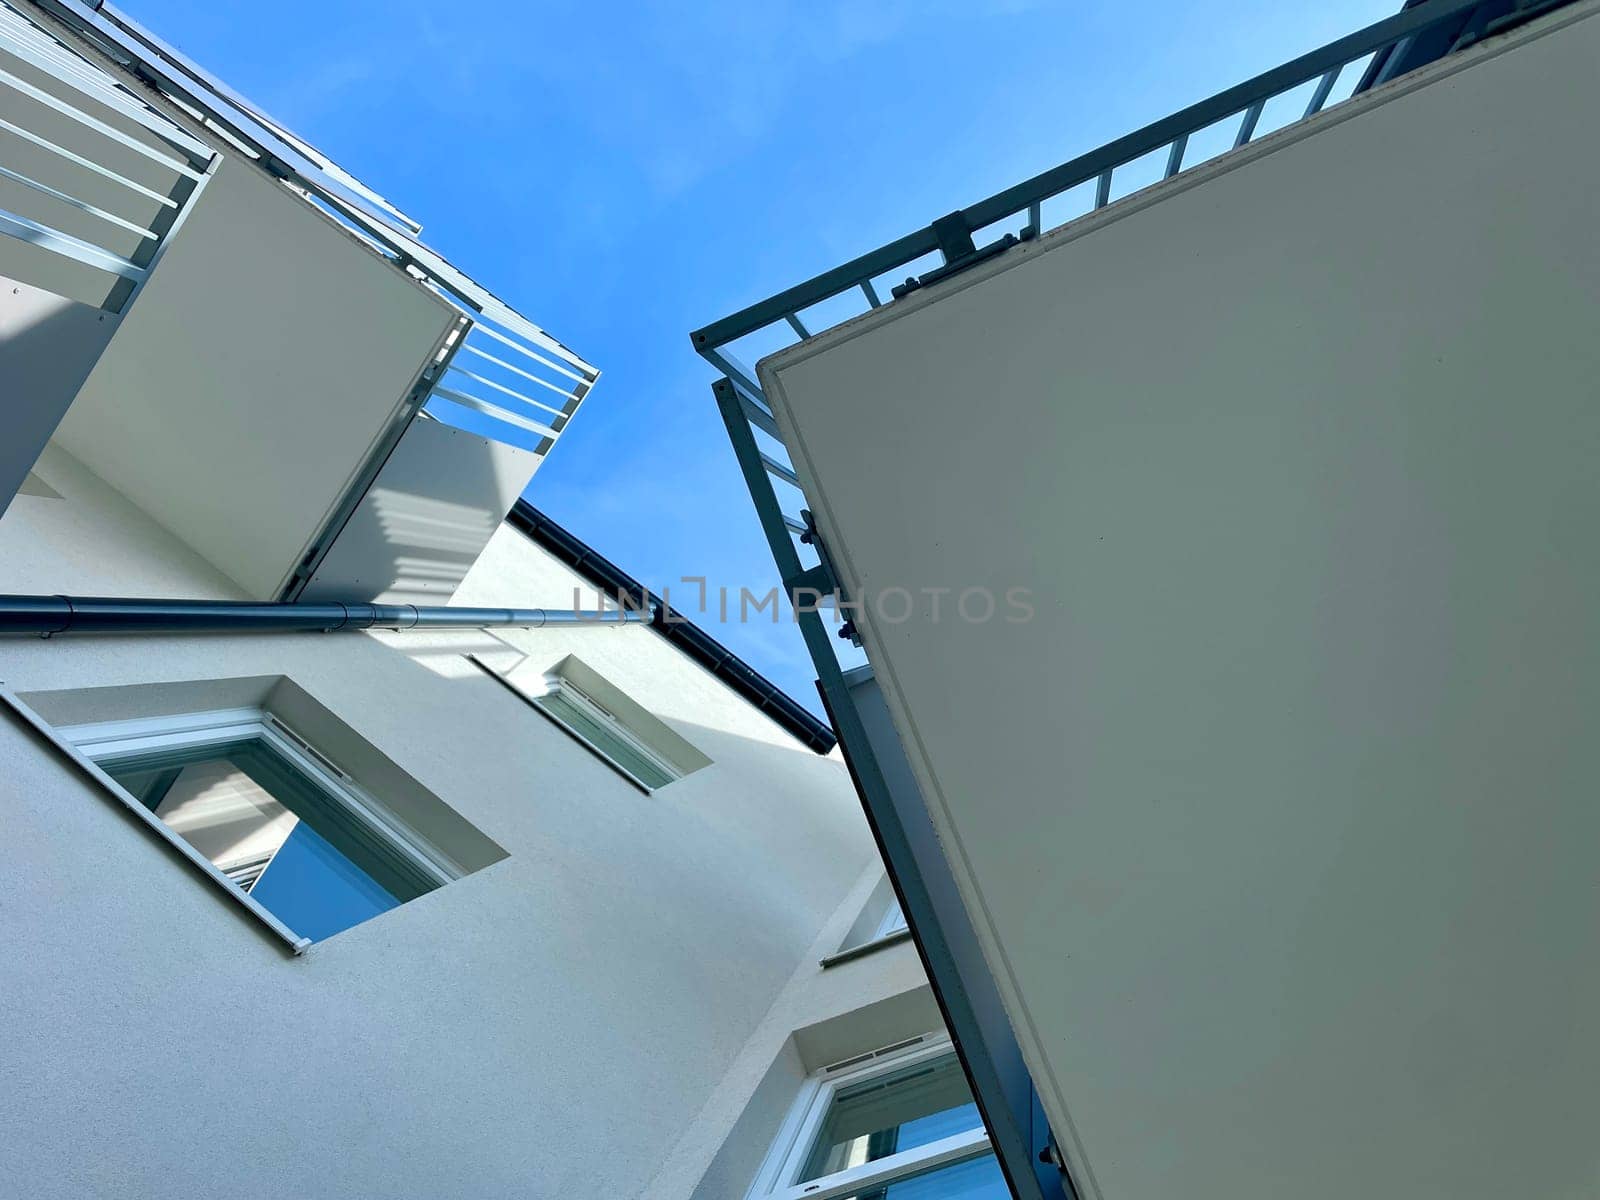 View of the sky between high-rise buildings, looking from the bottom up. High quality photo